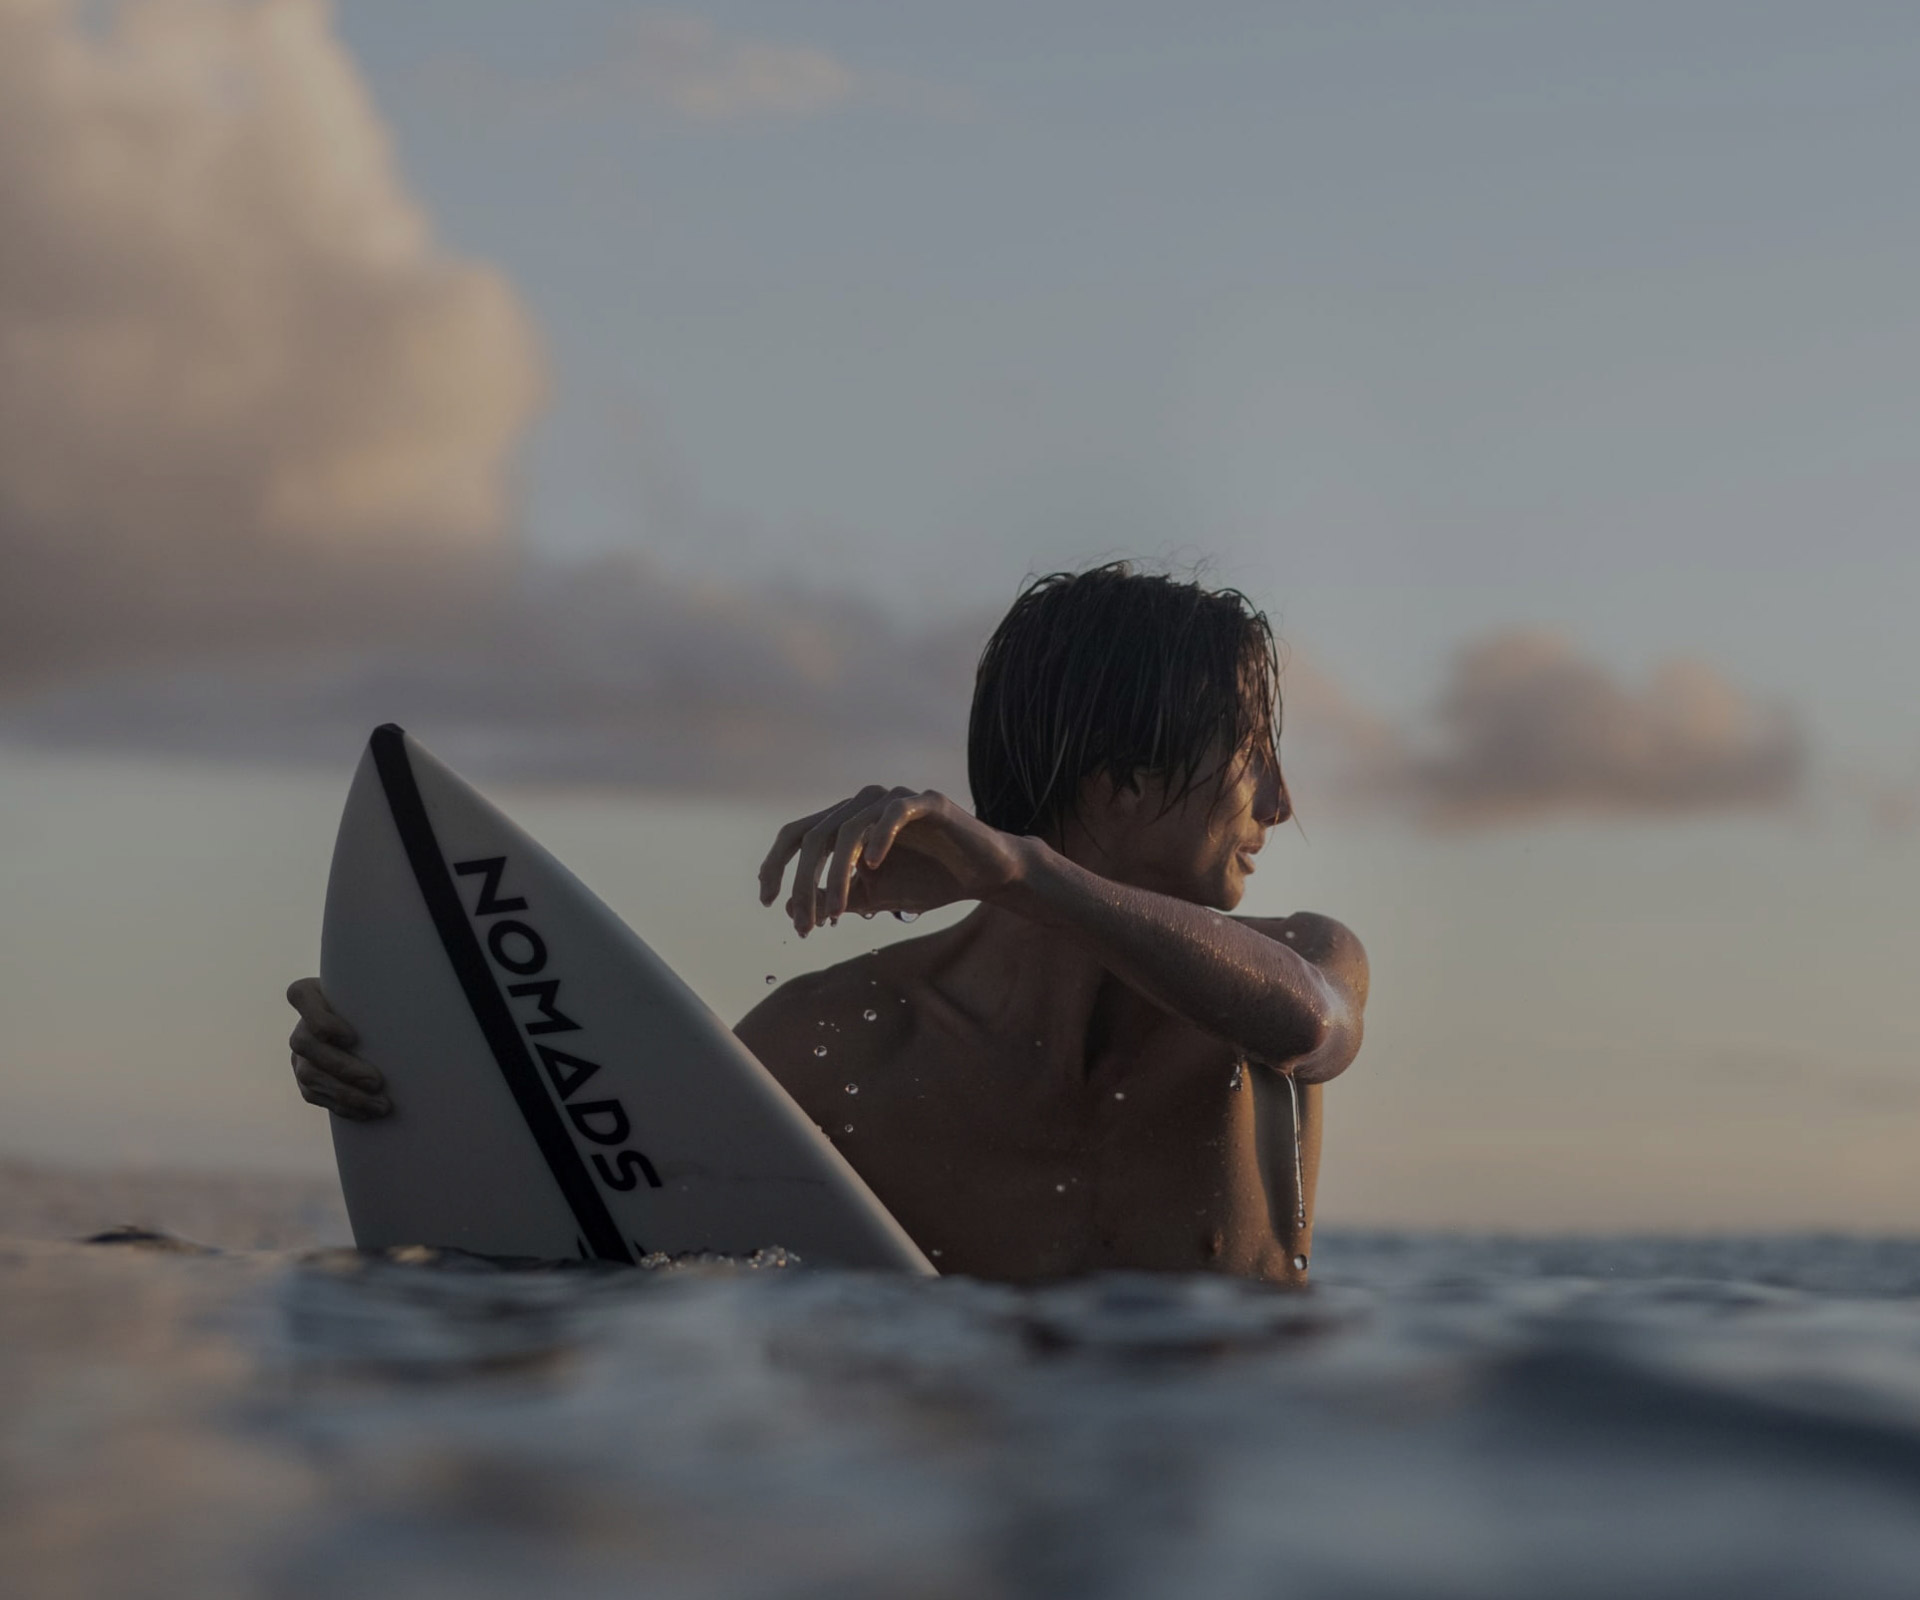 Nomads Surfing – Eco-friendly surfbrand Our universe